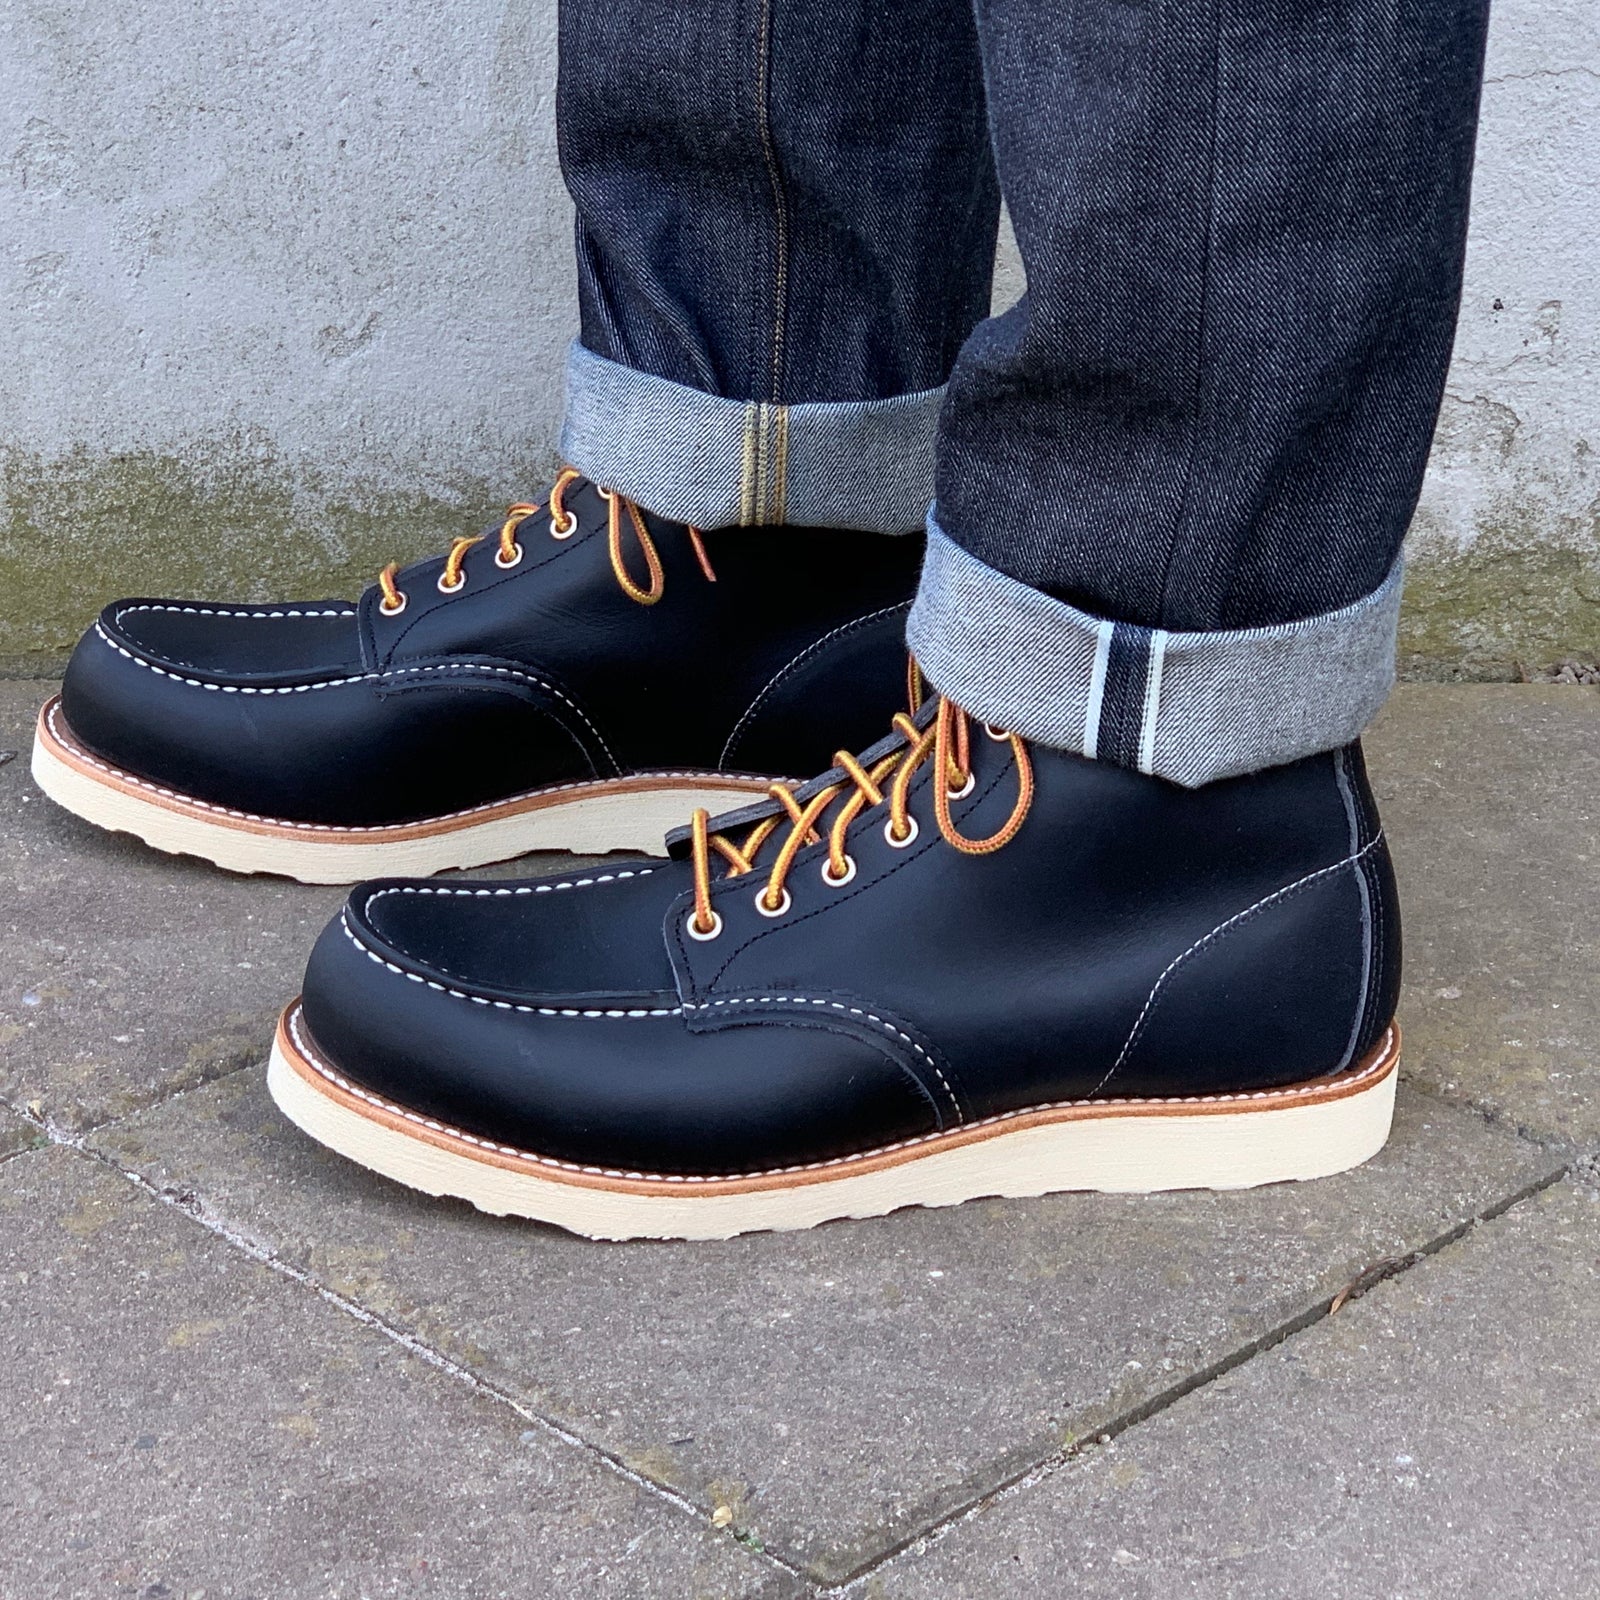 red wing boots online